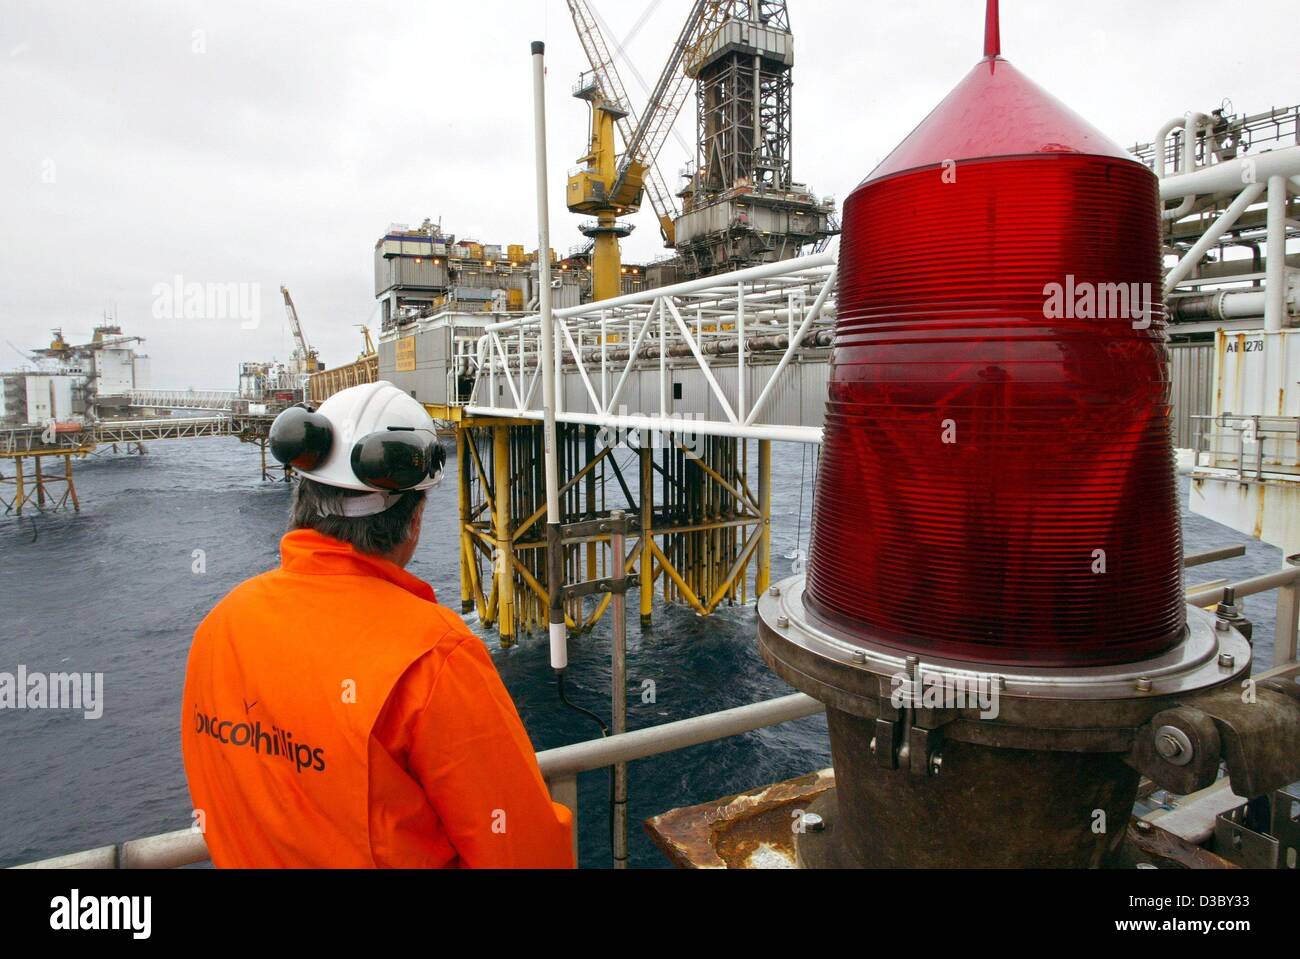 (dpa) - A worker stands on the gas and oil rig in the North Sea, about 250 km offshore of Stavanger, Norway, 5 July 2003. On the right a huge position light for ships. The platform belongs to the Ekofisk field complex, which comprises the oil and gas rigs Ekofisk, Eldfisk, Embla and Tor. The workers Stock Photo